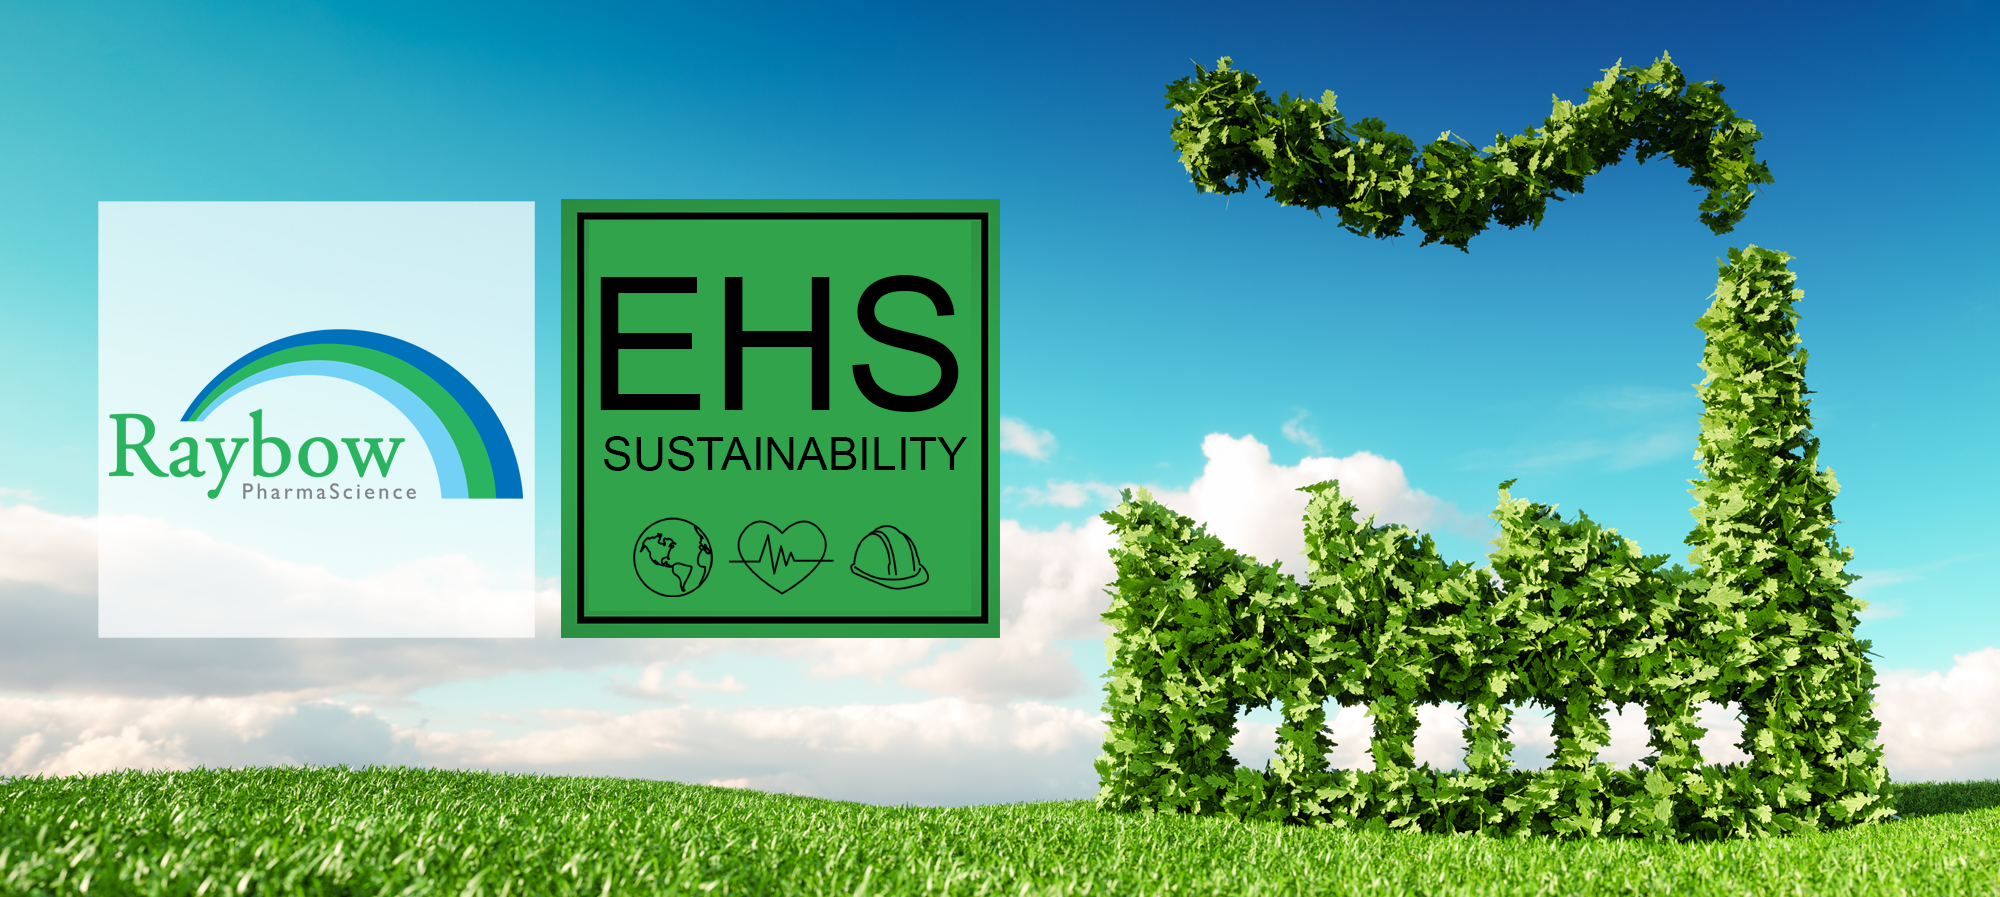 Environment Health & Safety (EHS) Image